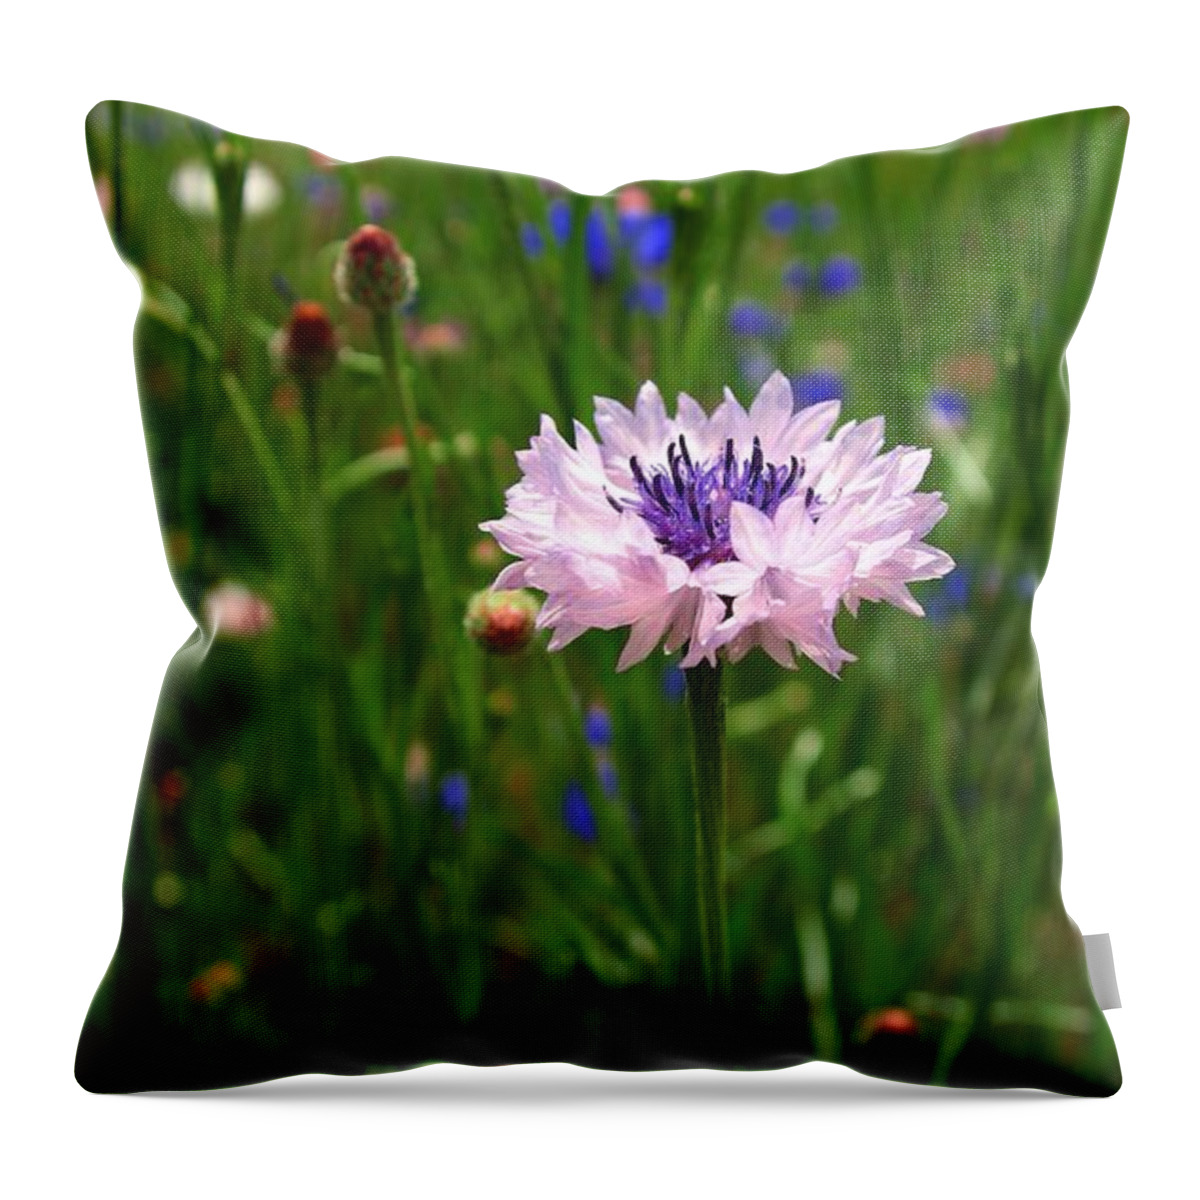 Bachelor Button Throw Pillow featuring the photograph Lonely by Lynn Hopwood